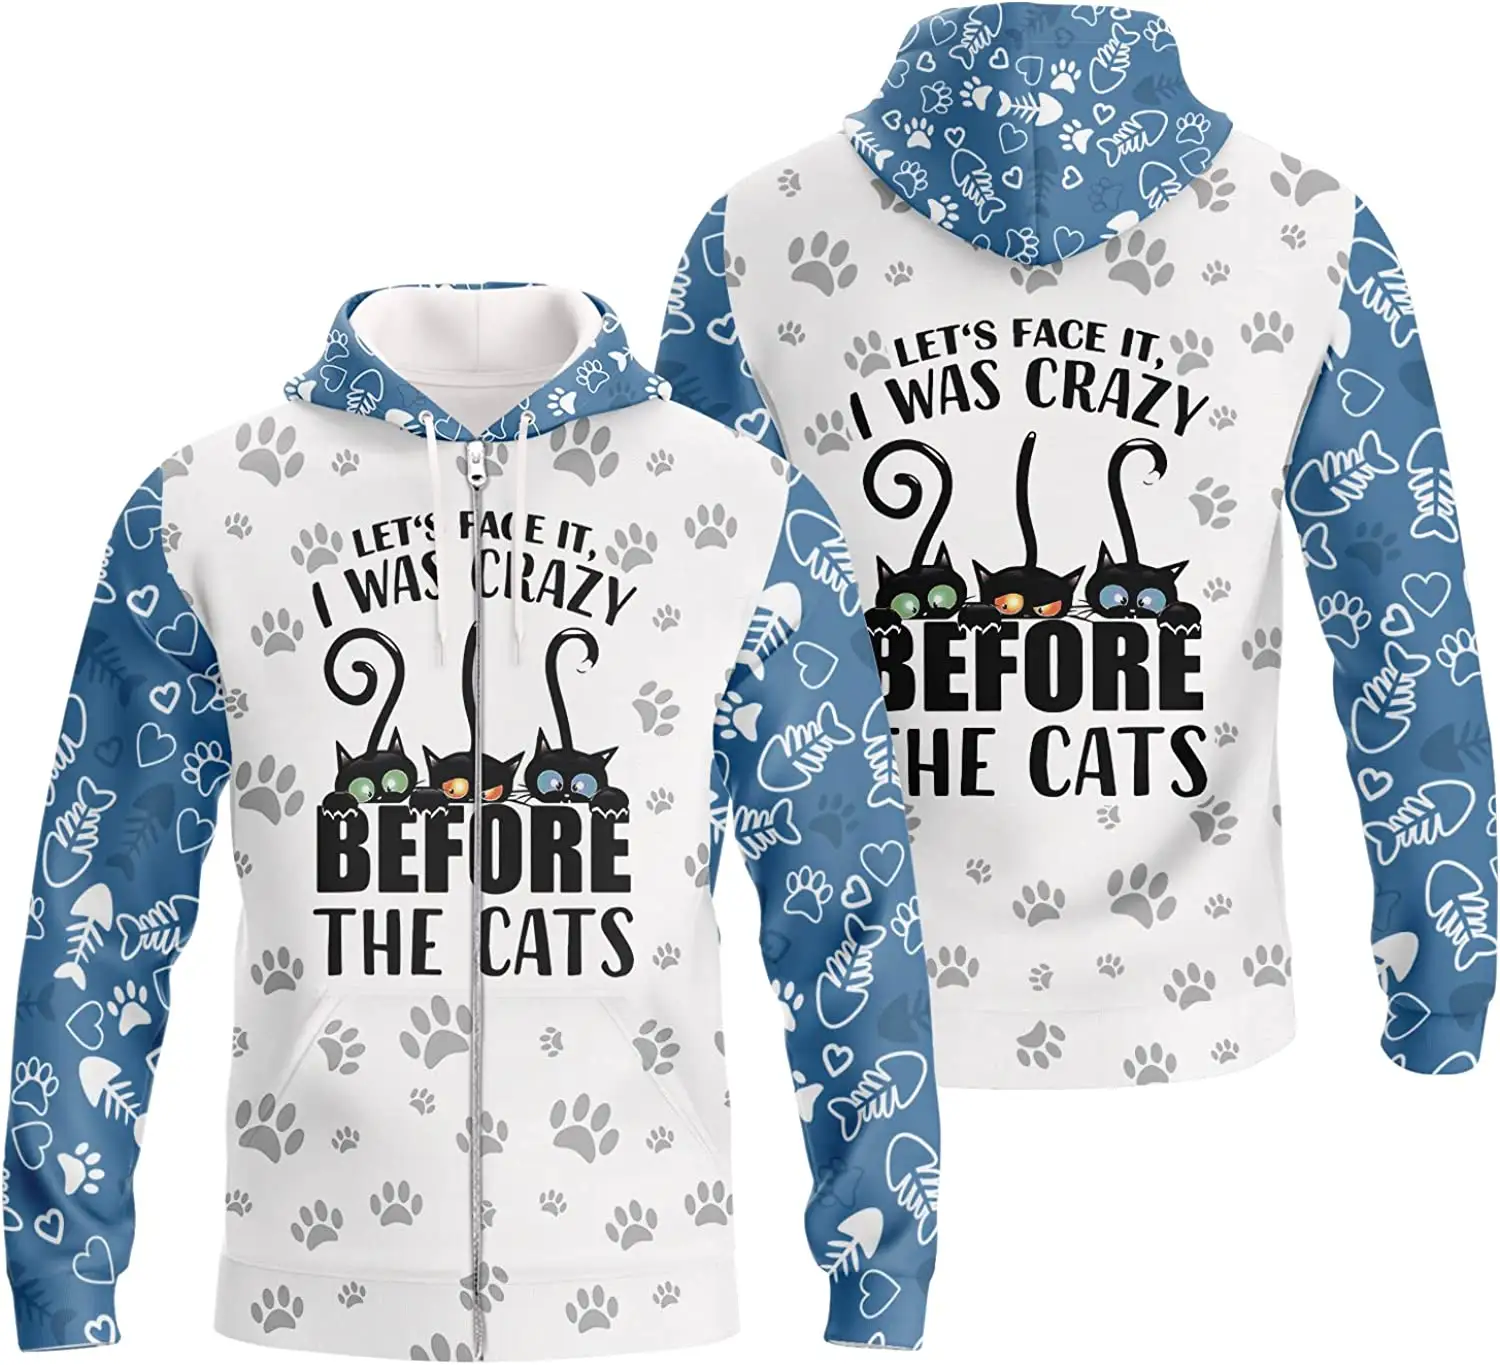 Fitspi 3d Animal Cat Zip Hoodie Cute Kitty Design Jacket With Let Face It I Was Crazy Before The Cats Quote For Kitty Pet Owner